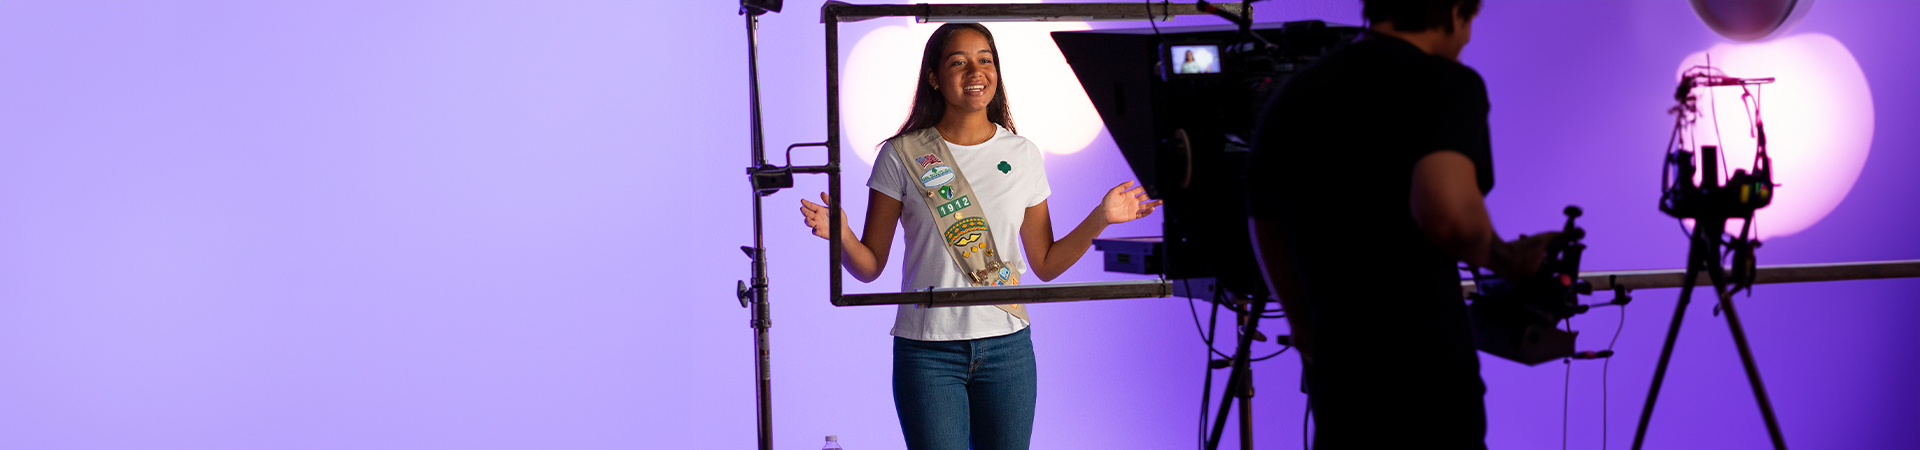  girl scout in front of tv camera 